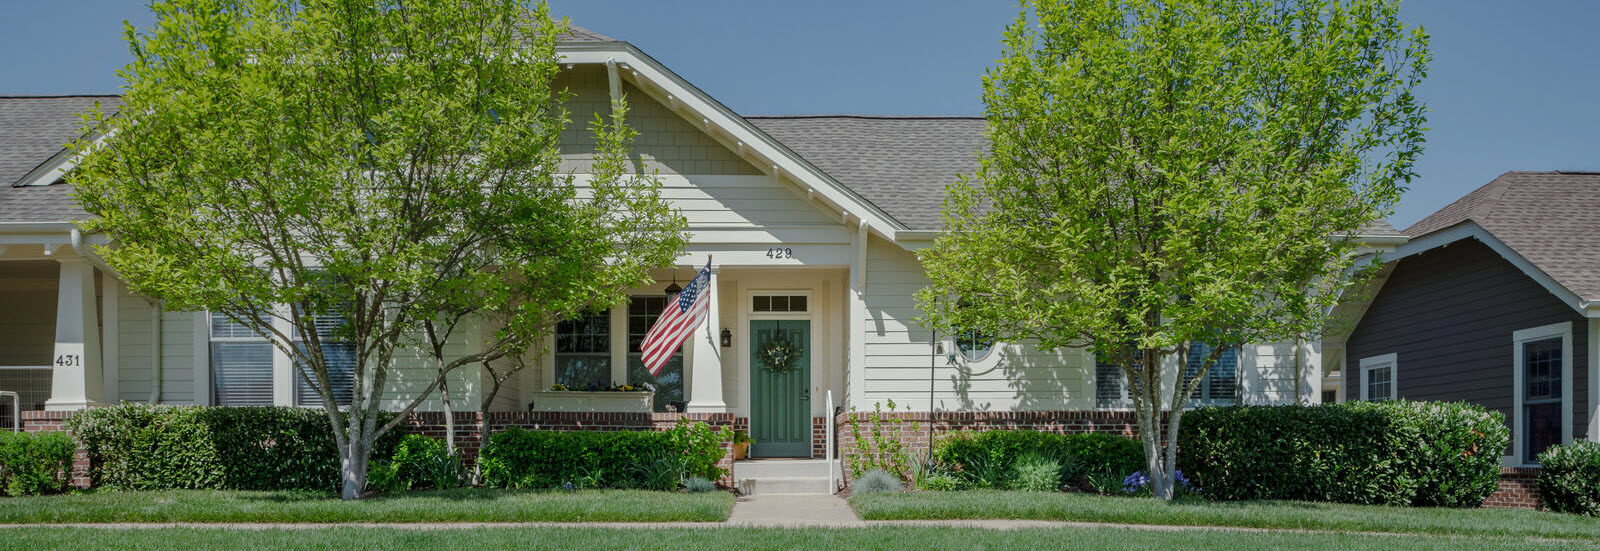 front porch of Craftsman style Courtyard home with green lawn and American flag